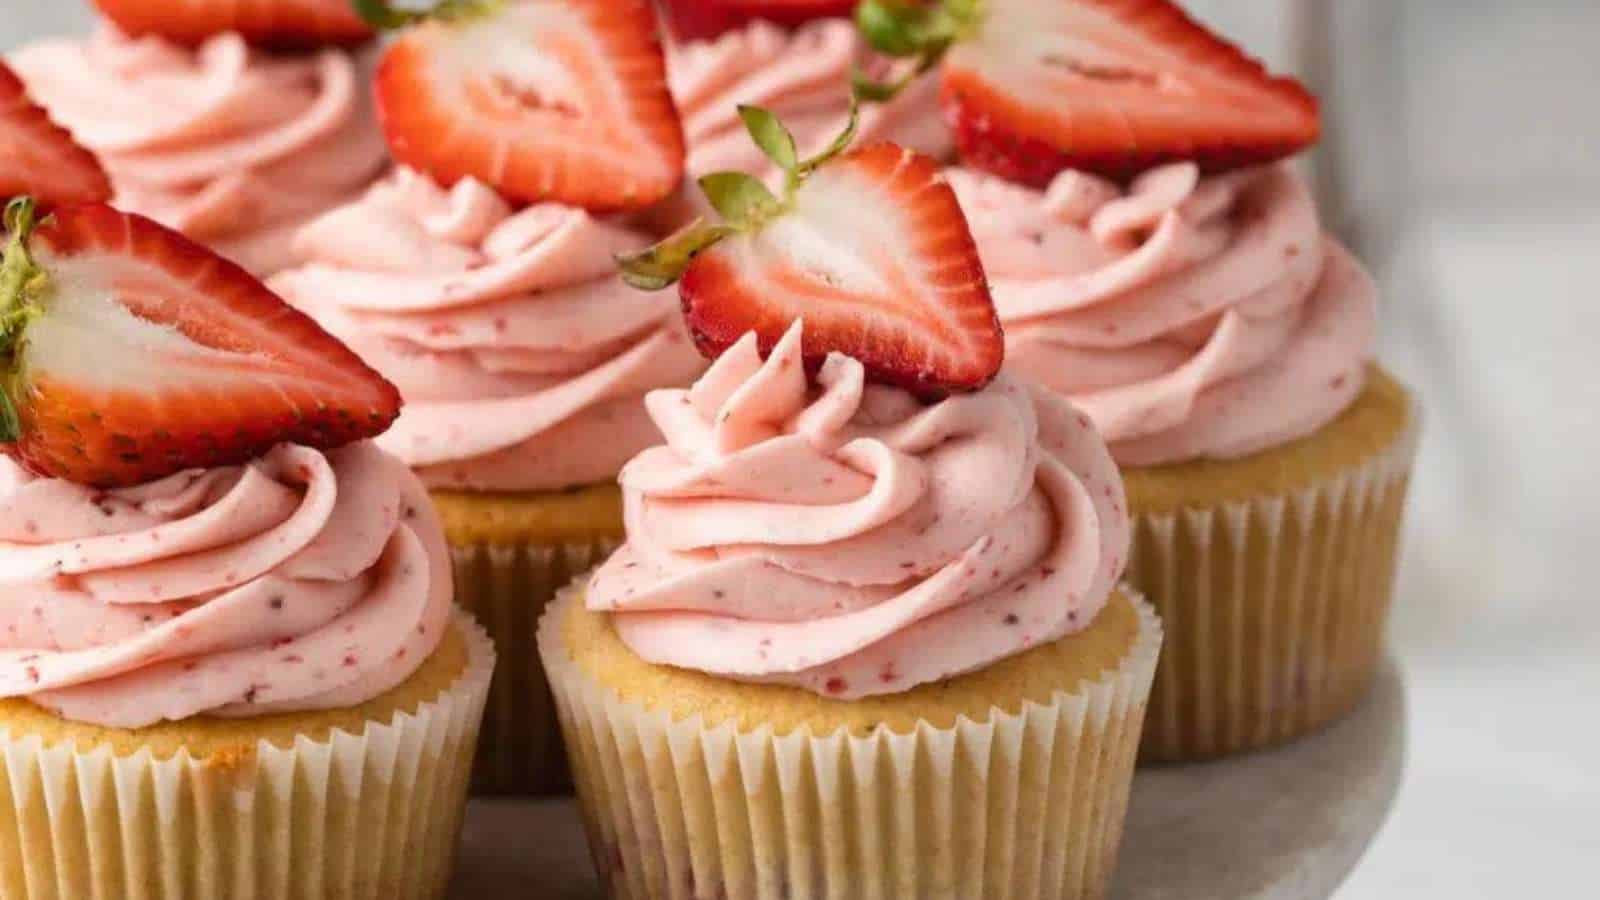 Strawberry cupcakes topped with whipped cream and strawberries.